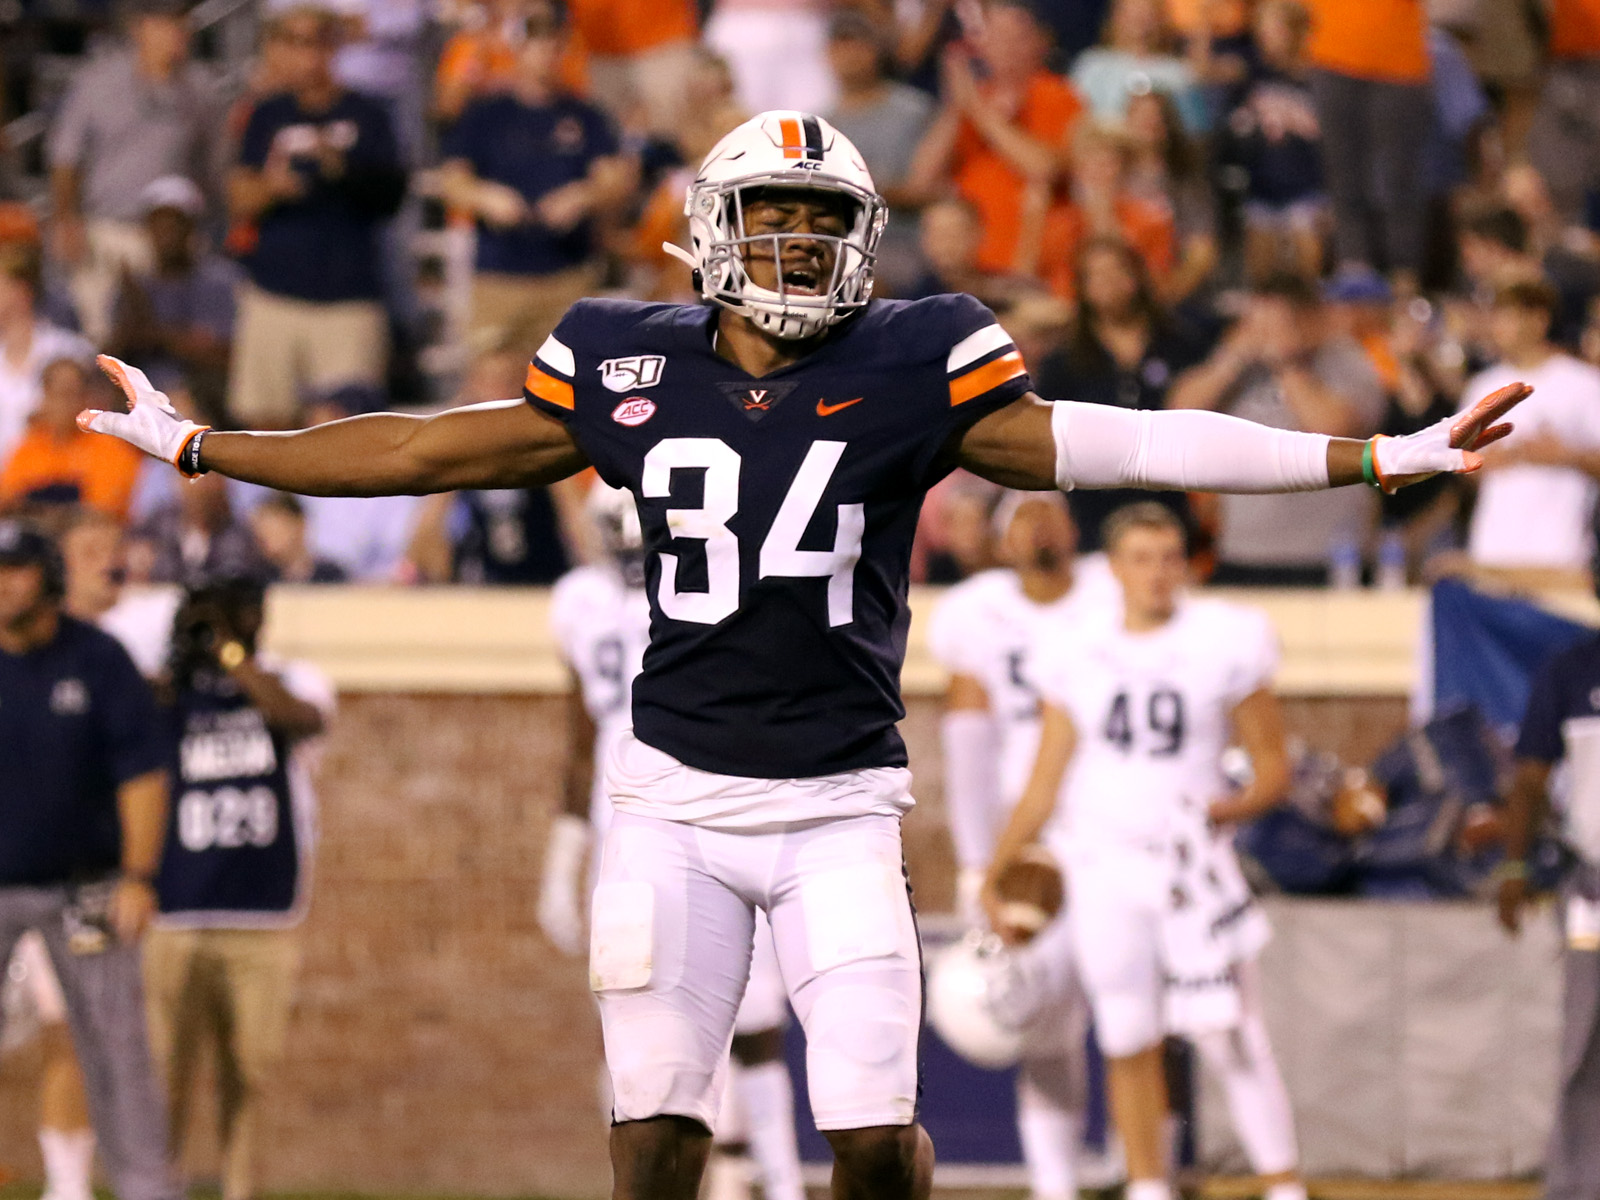 Virginia's Bryce Hall suffered a season-ending injury in October.